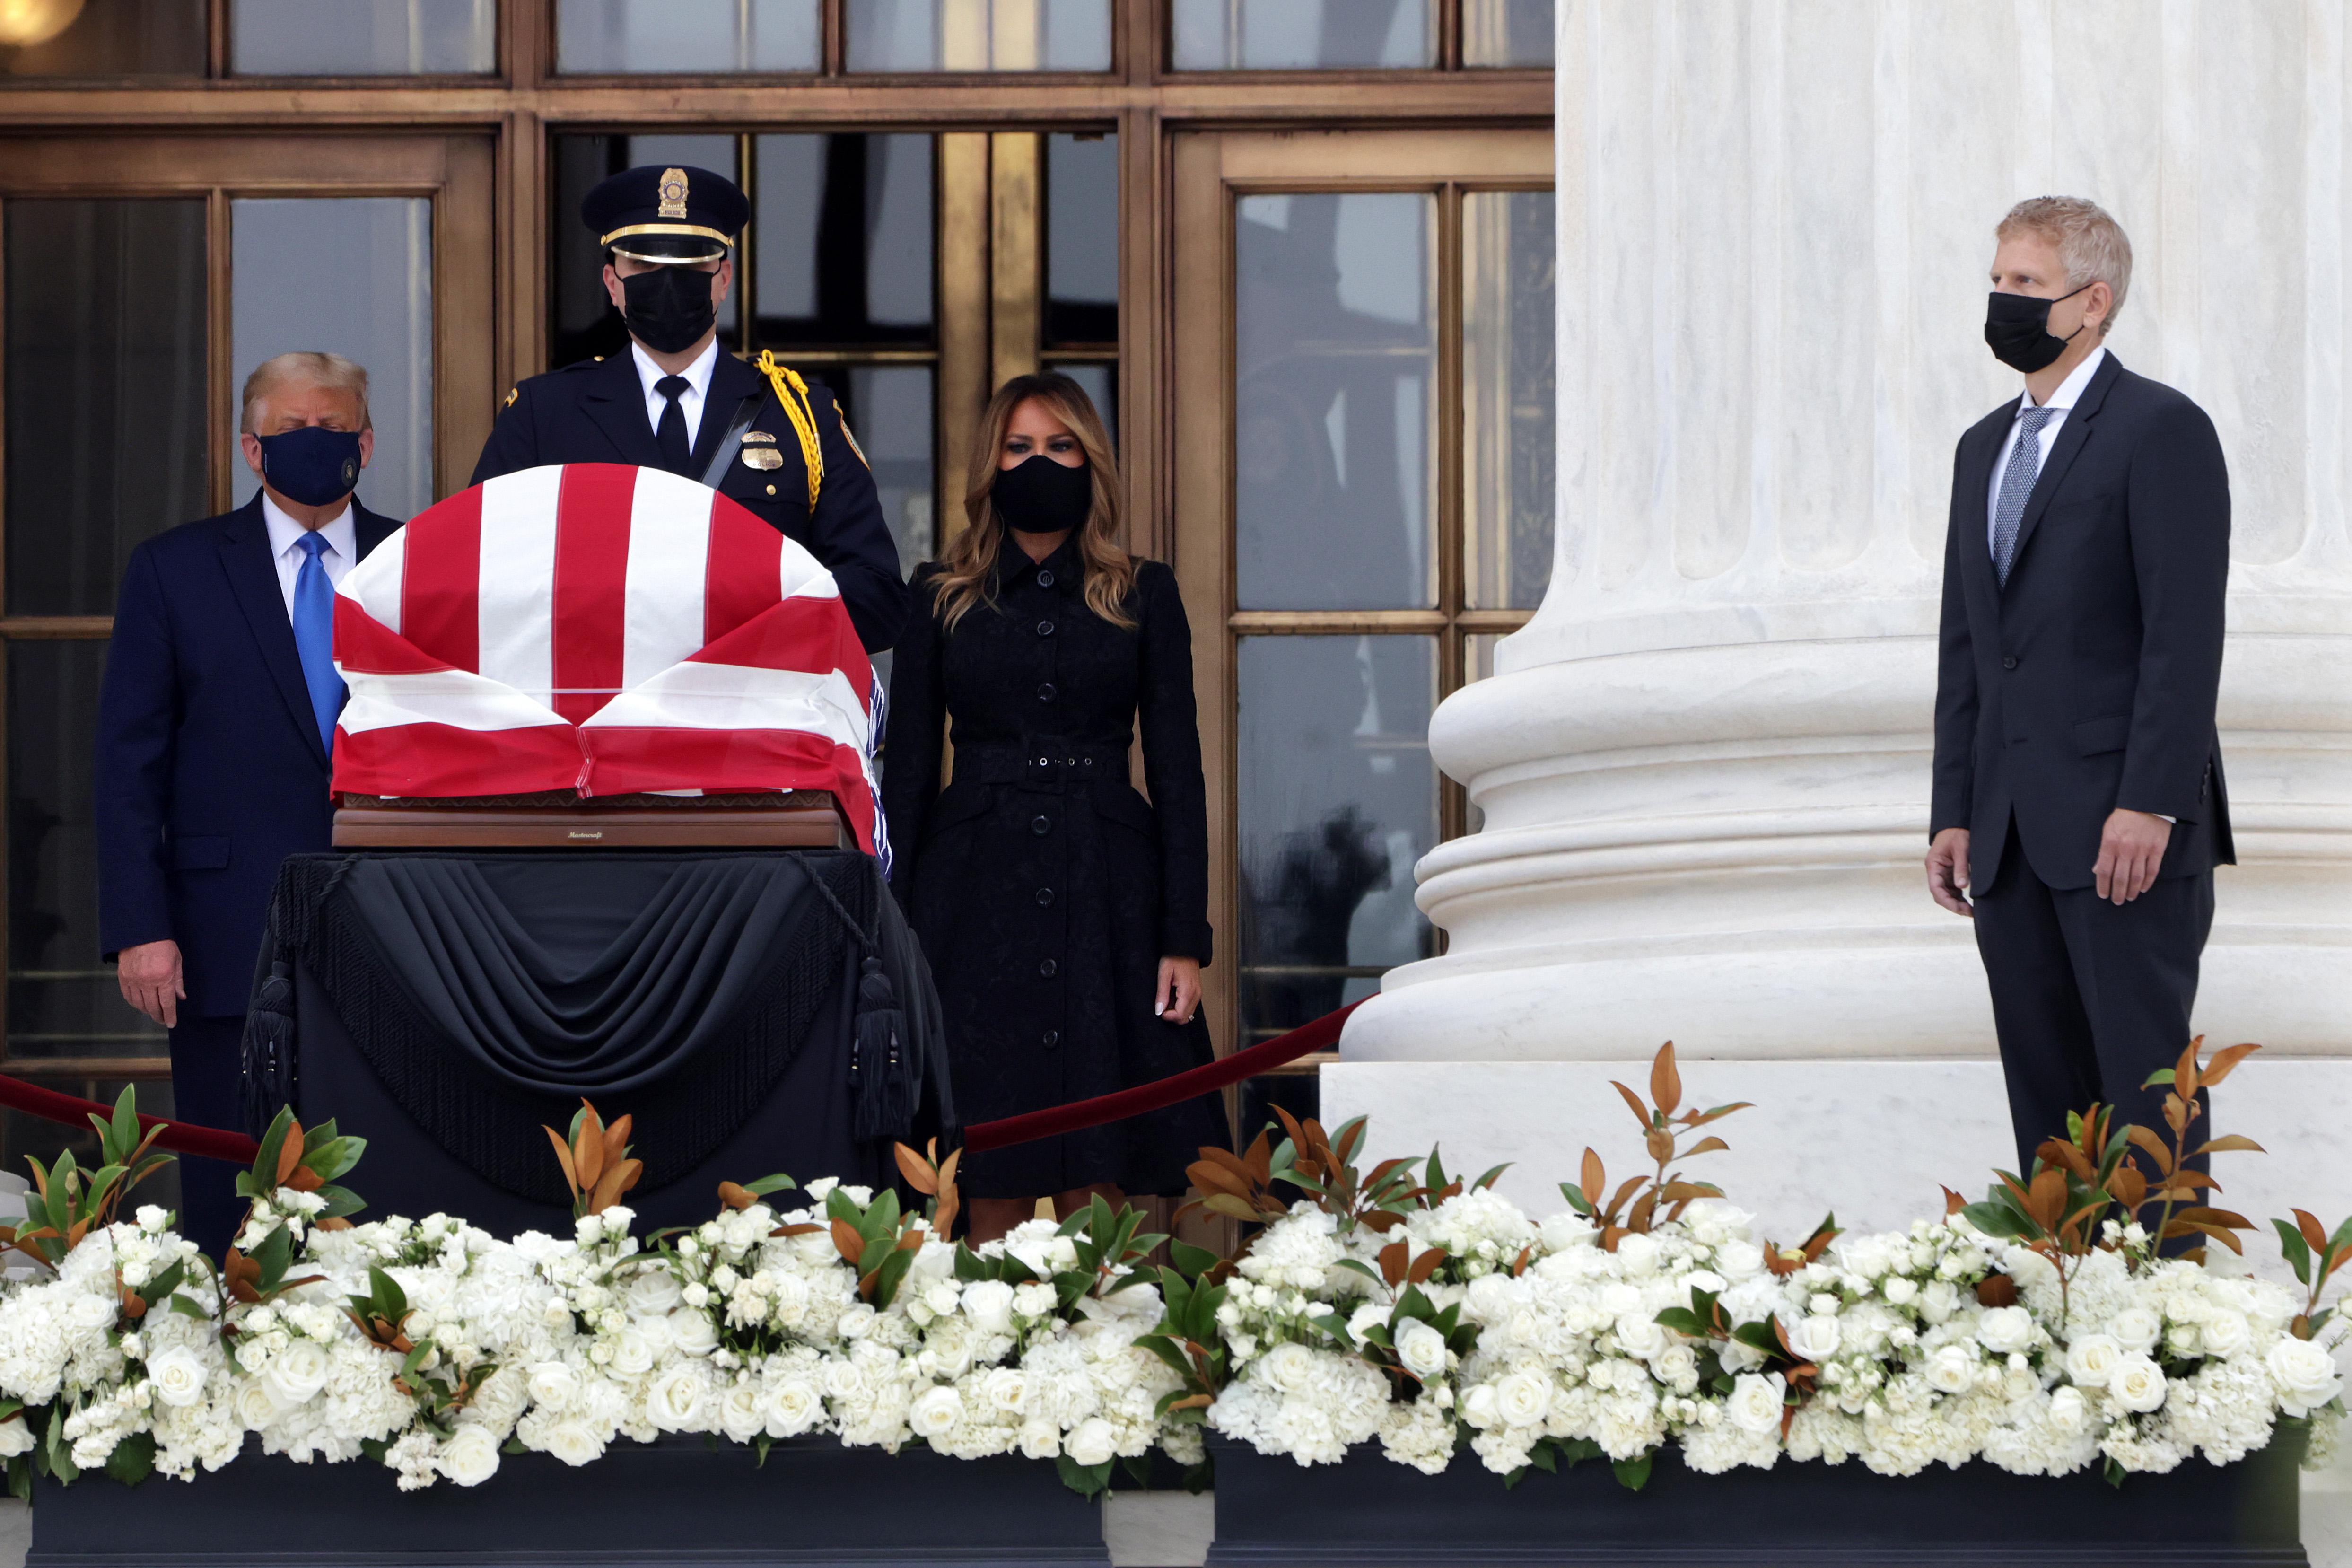 Donald and Melania Trump stand in front of Ruth Bader Ginsburg's casket in the entryway of the Supreme Court while Neil Seigel stands by.